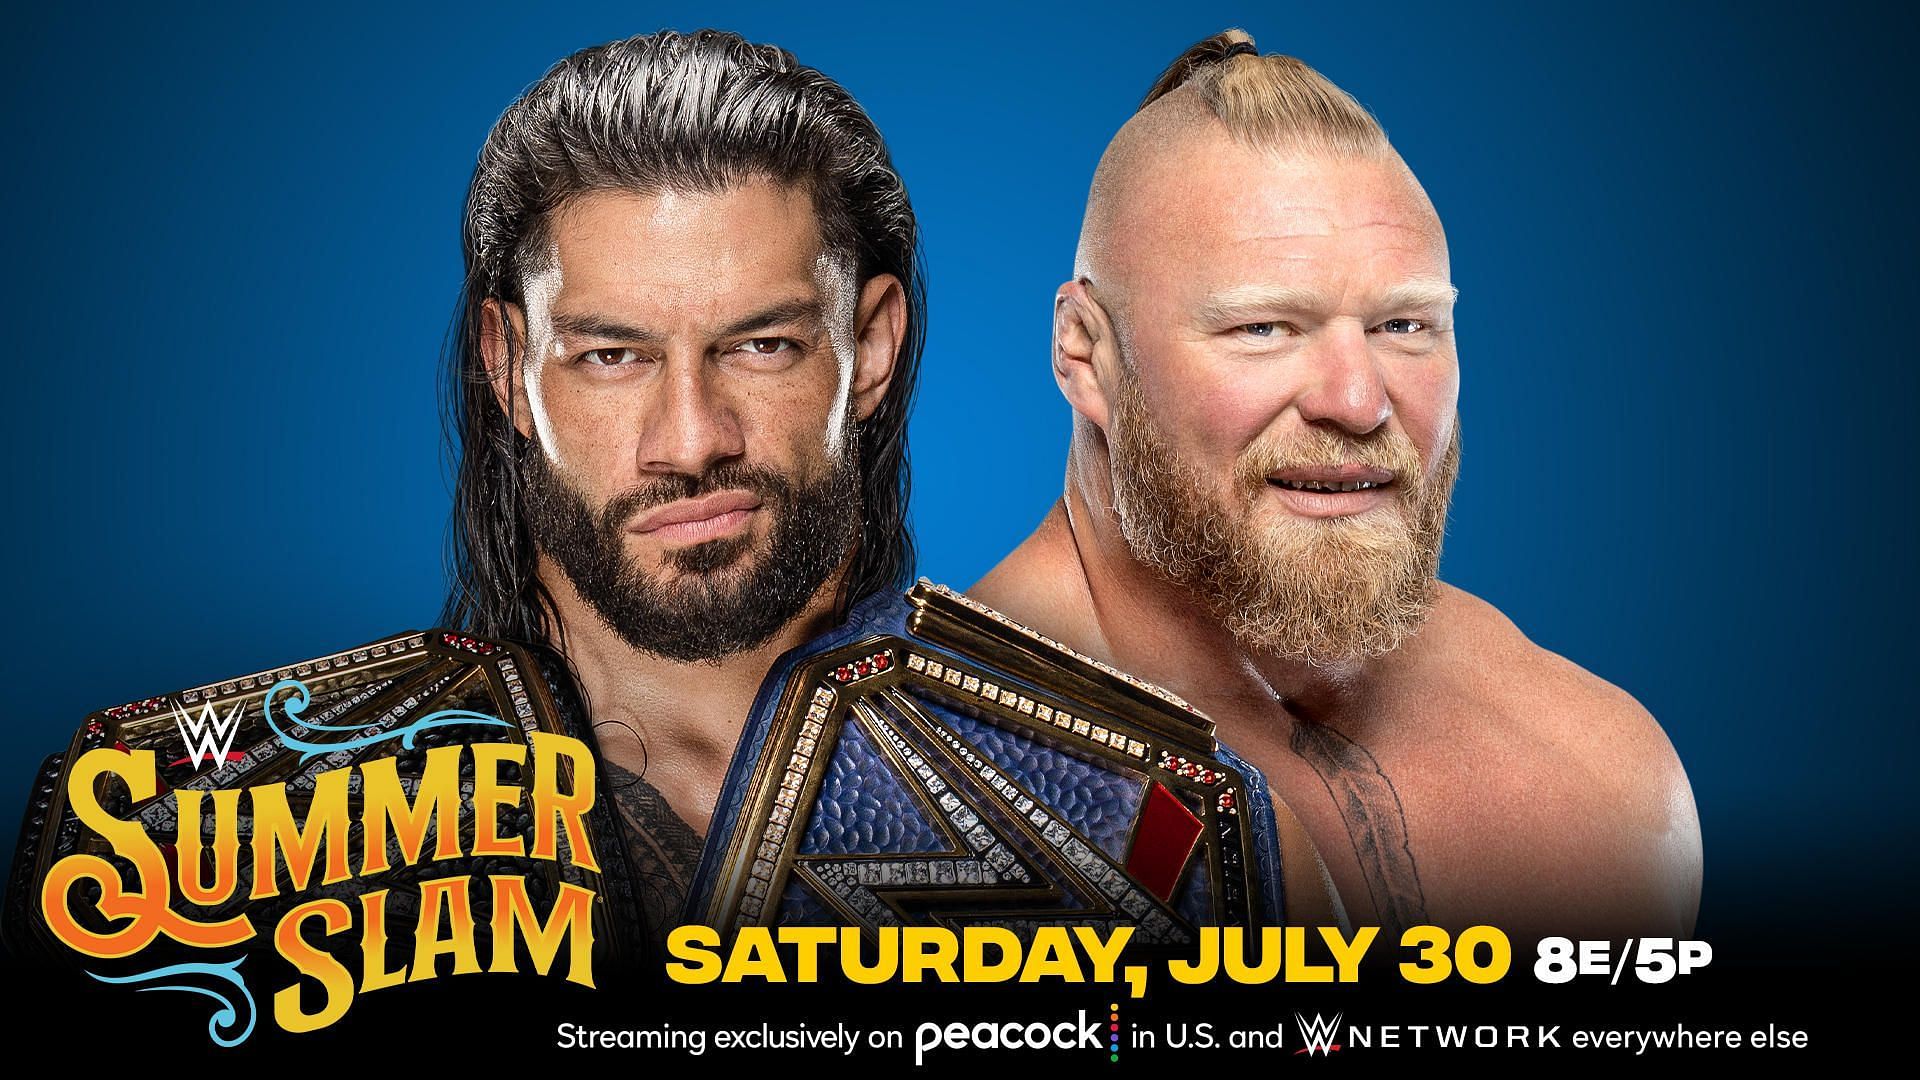 Brock Lesnar and Roman Reigns will wage war at SummerSlam